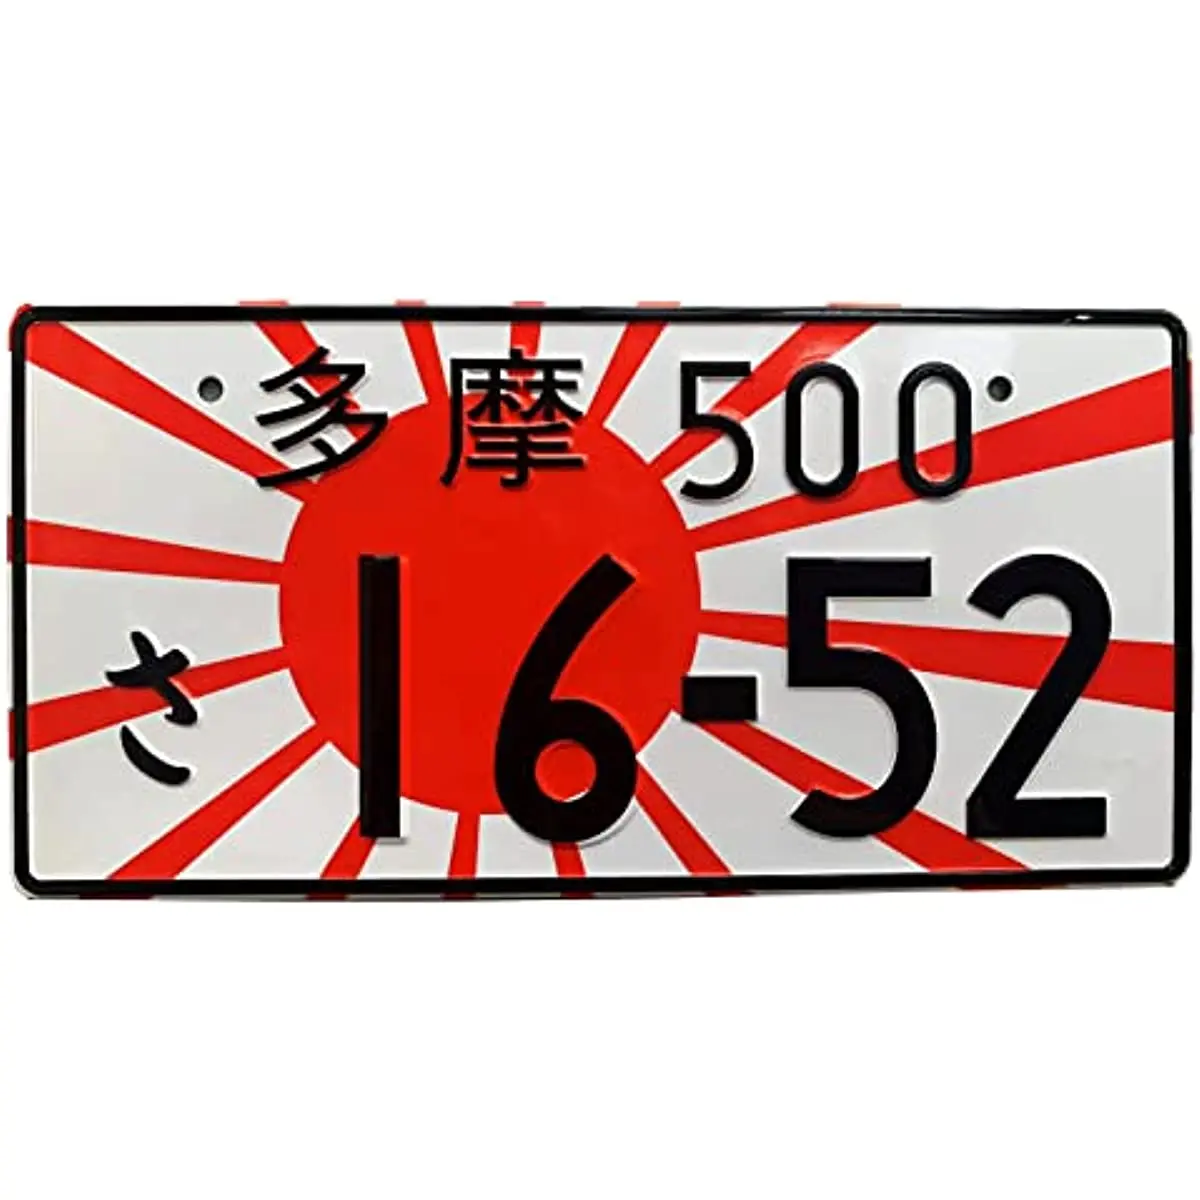 

Hot Universal Embossed Characters Numbers Japanese Auto Car License Plate Aluminum farmhouse decor wall decor room decor